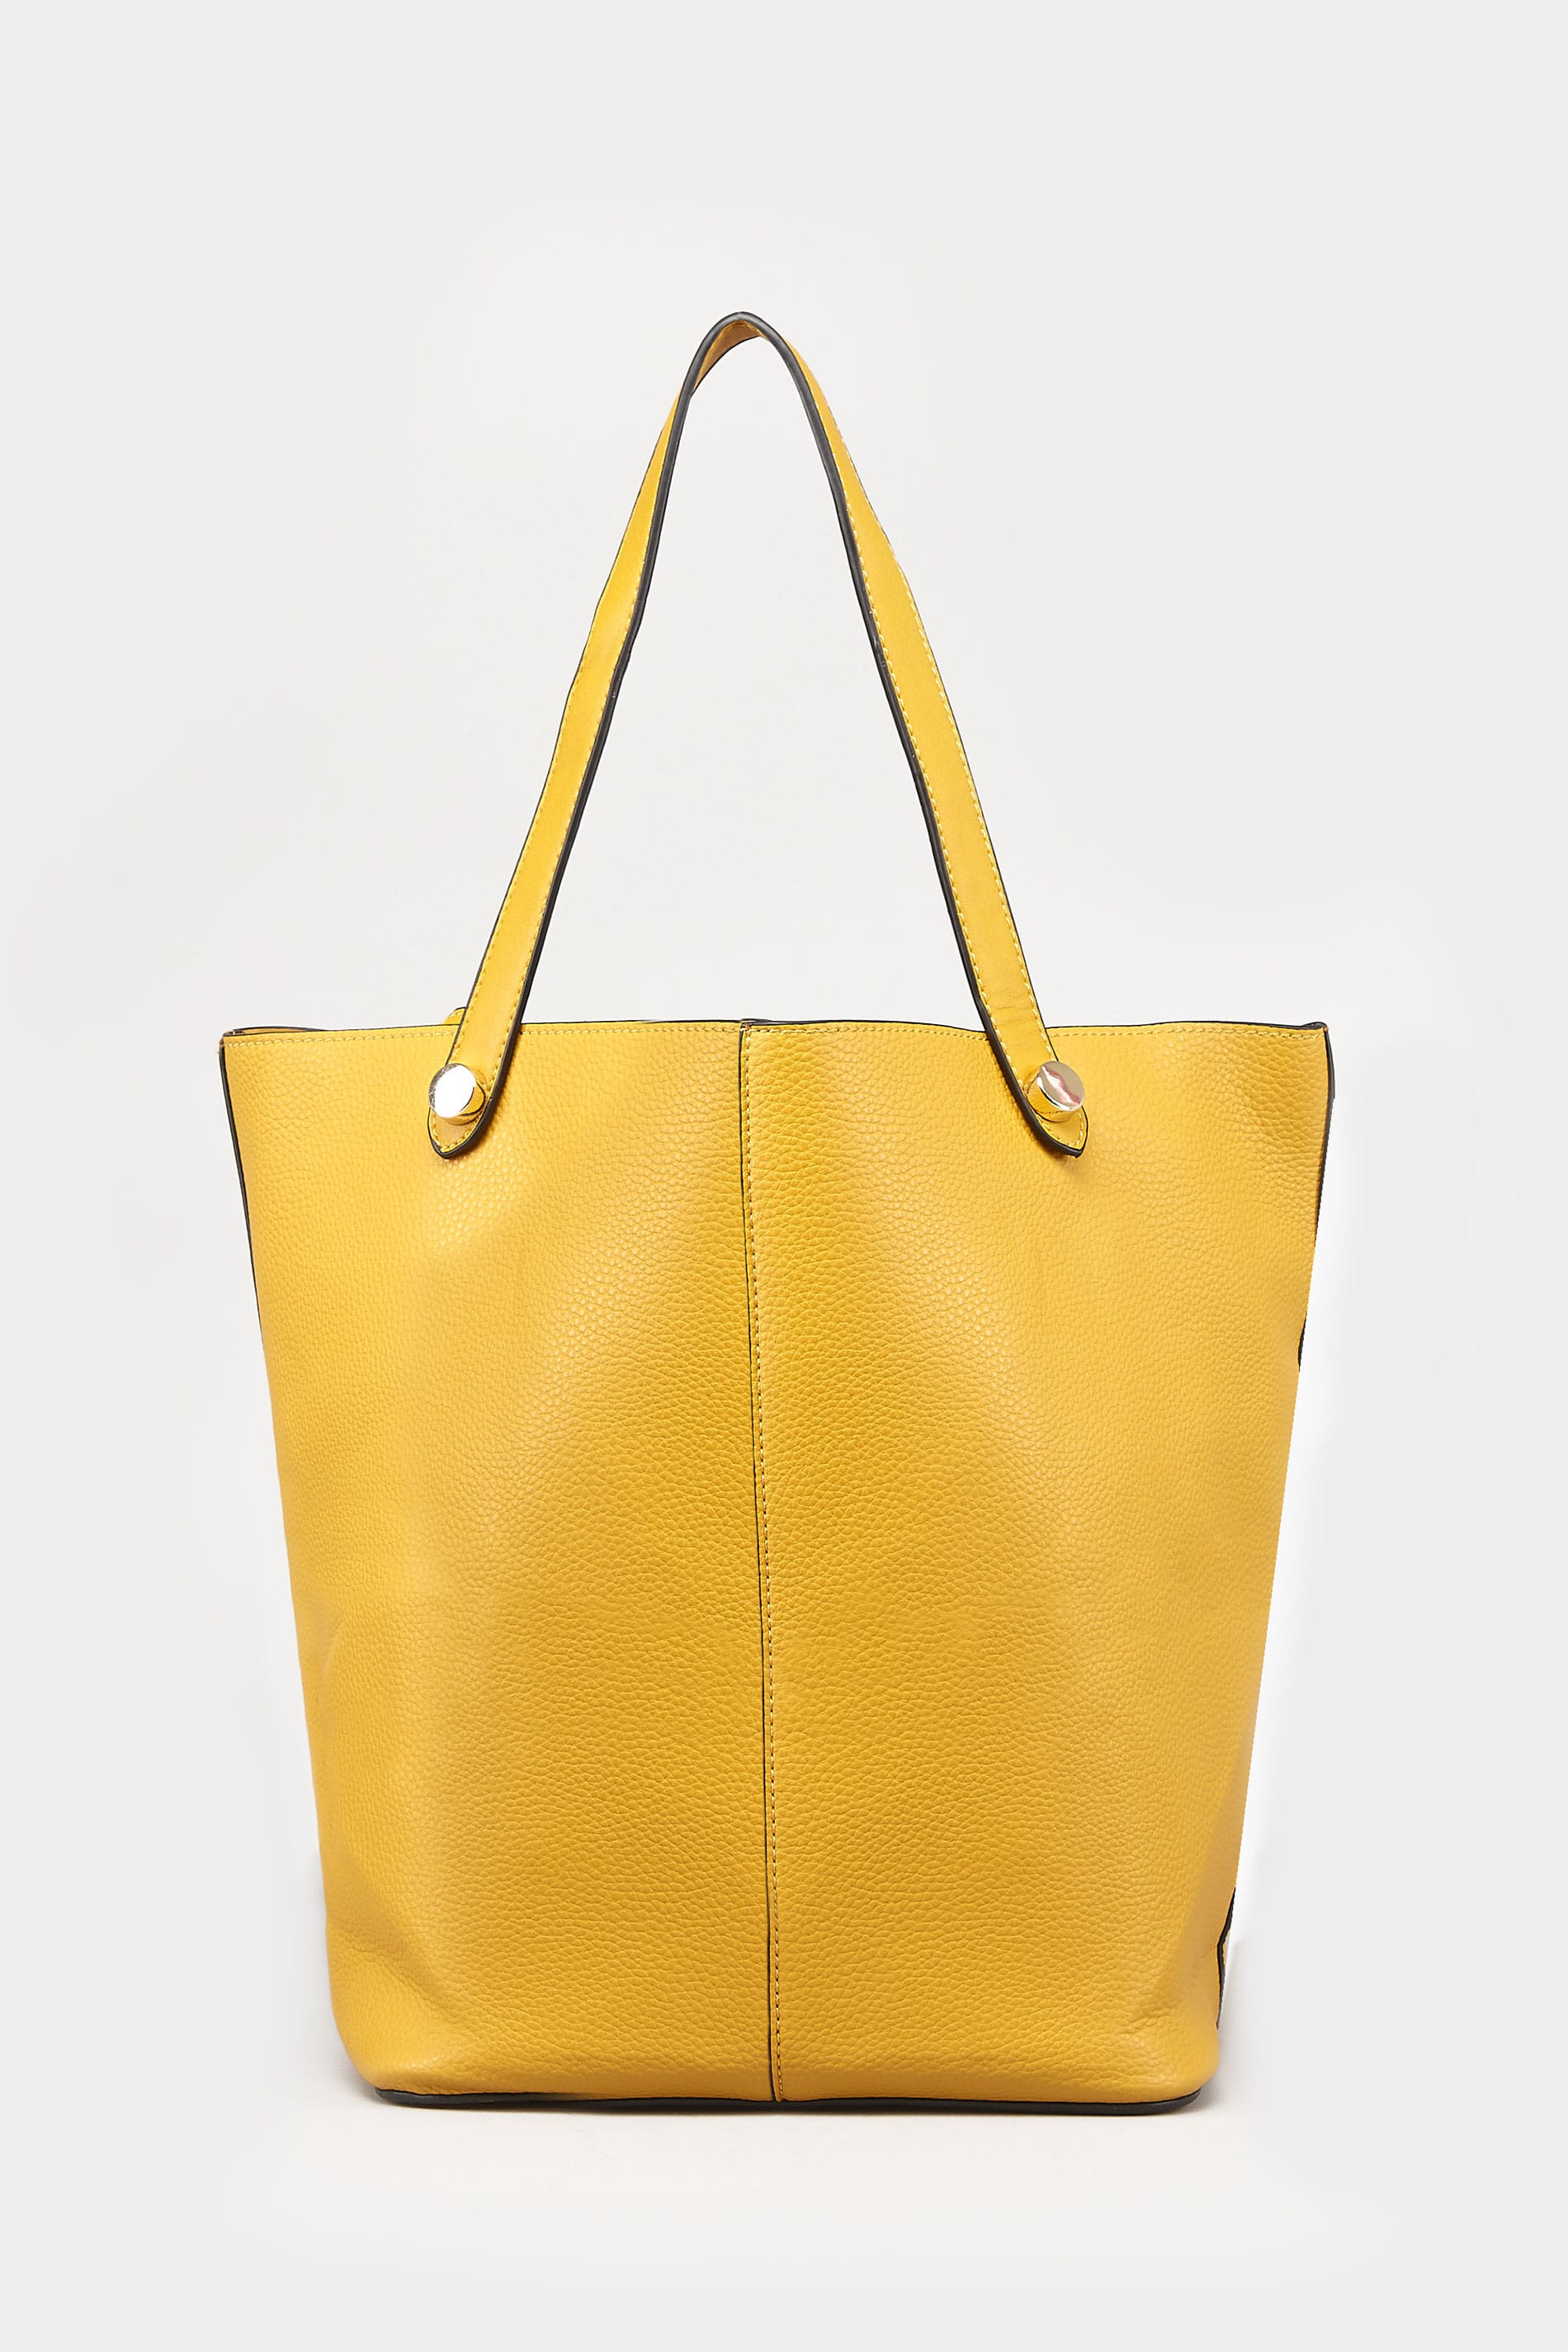 Mustard Yellow Grained Tote Bag With Removable Compartment